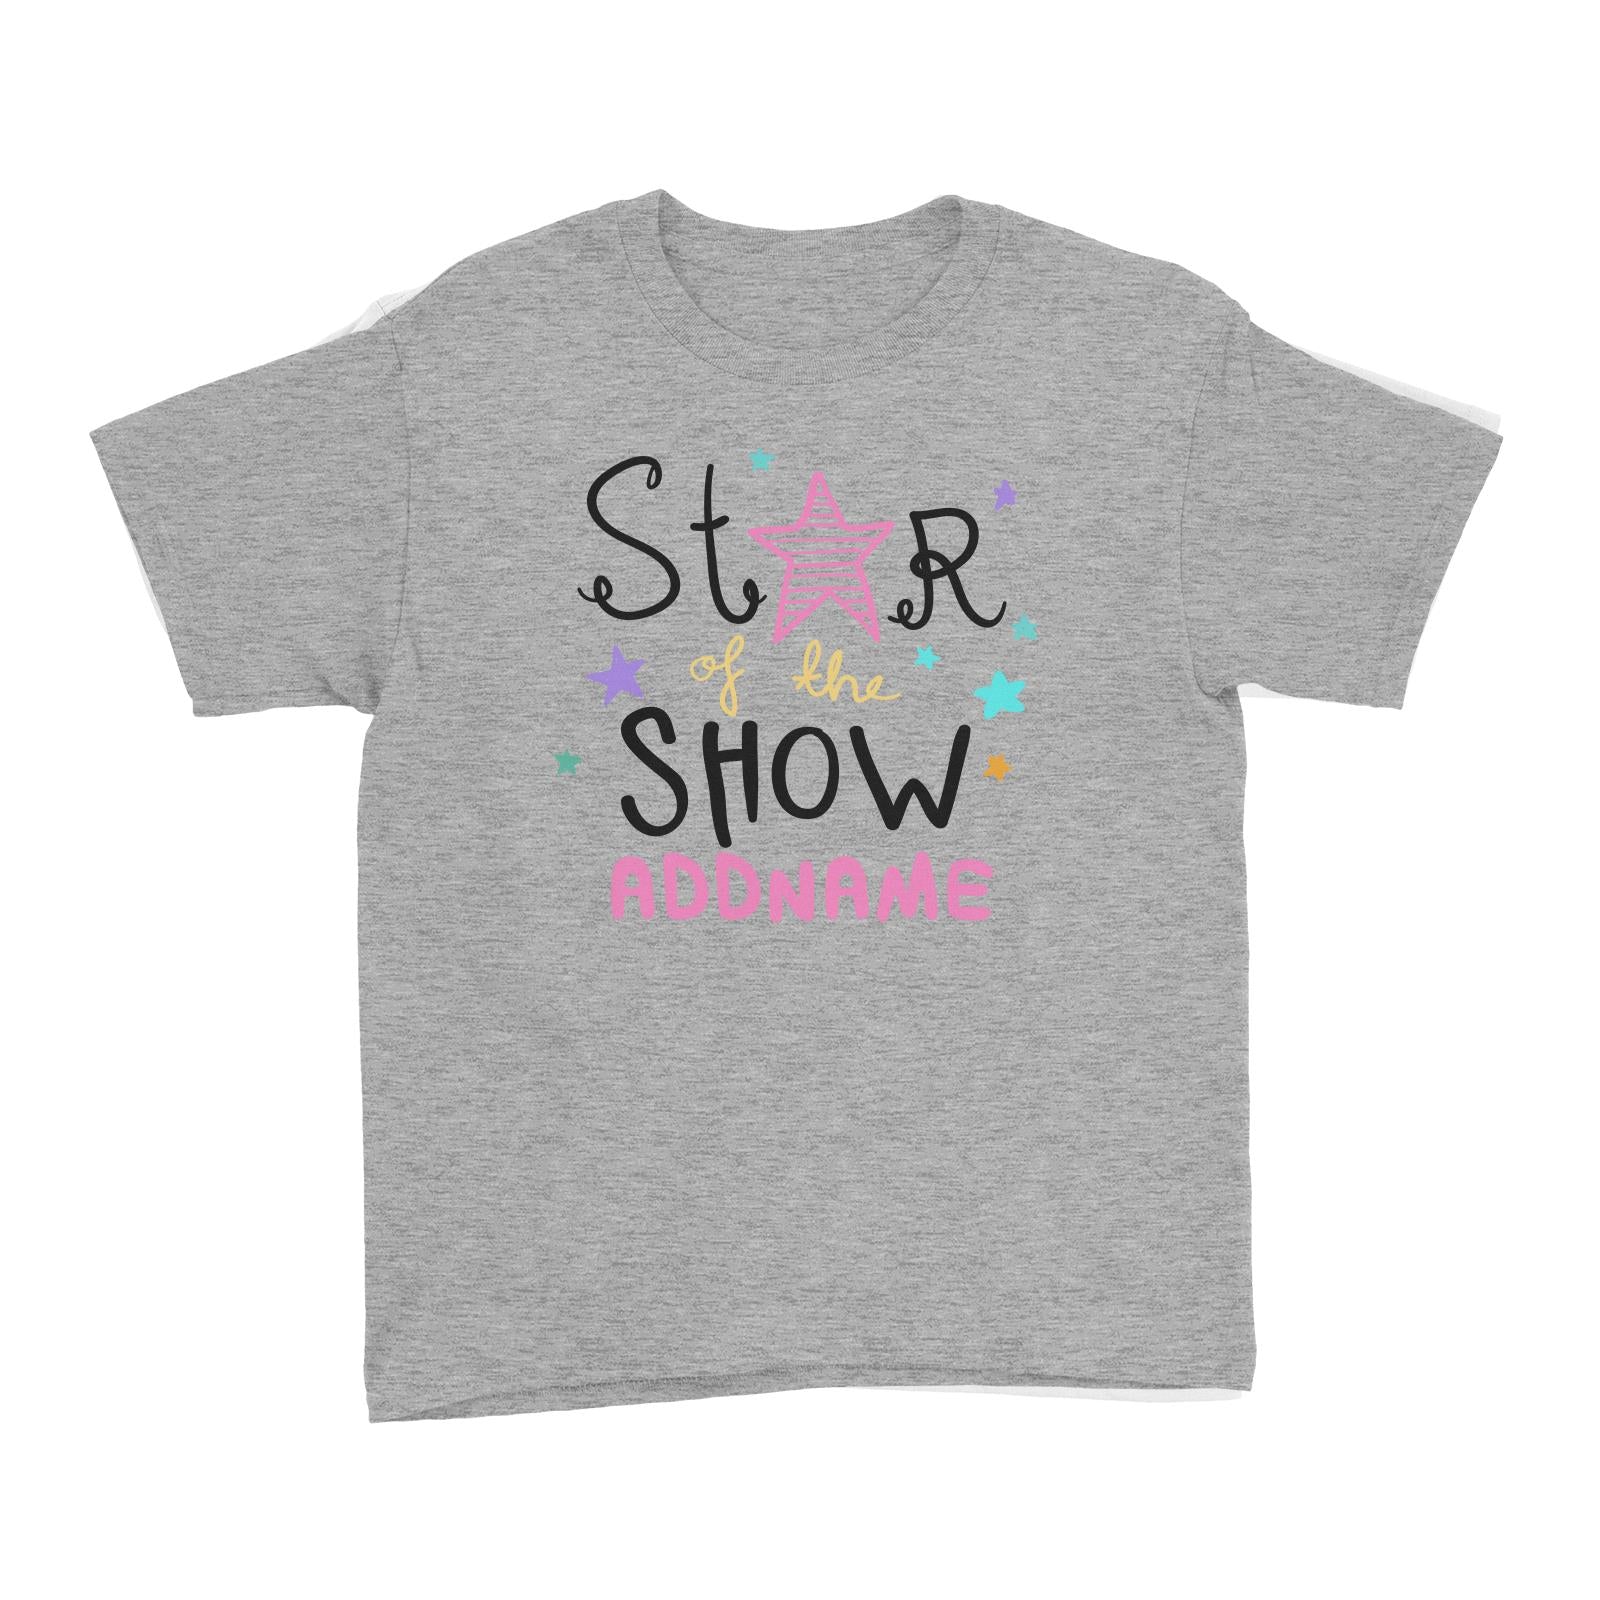 Children's Day Gift Series Star Of The Show Pink Addname Kid's T-Shirt